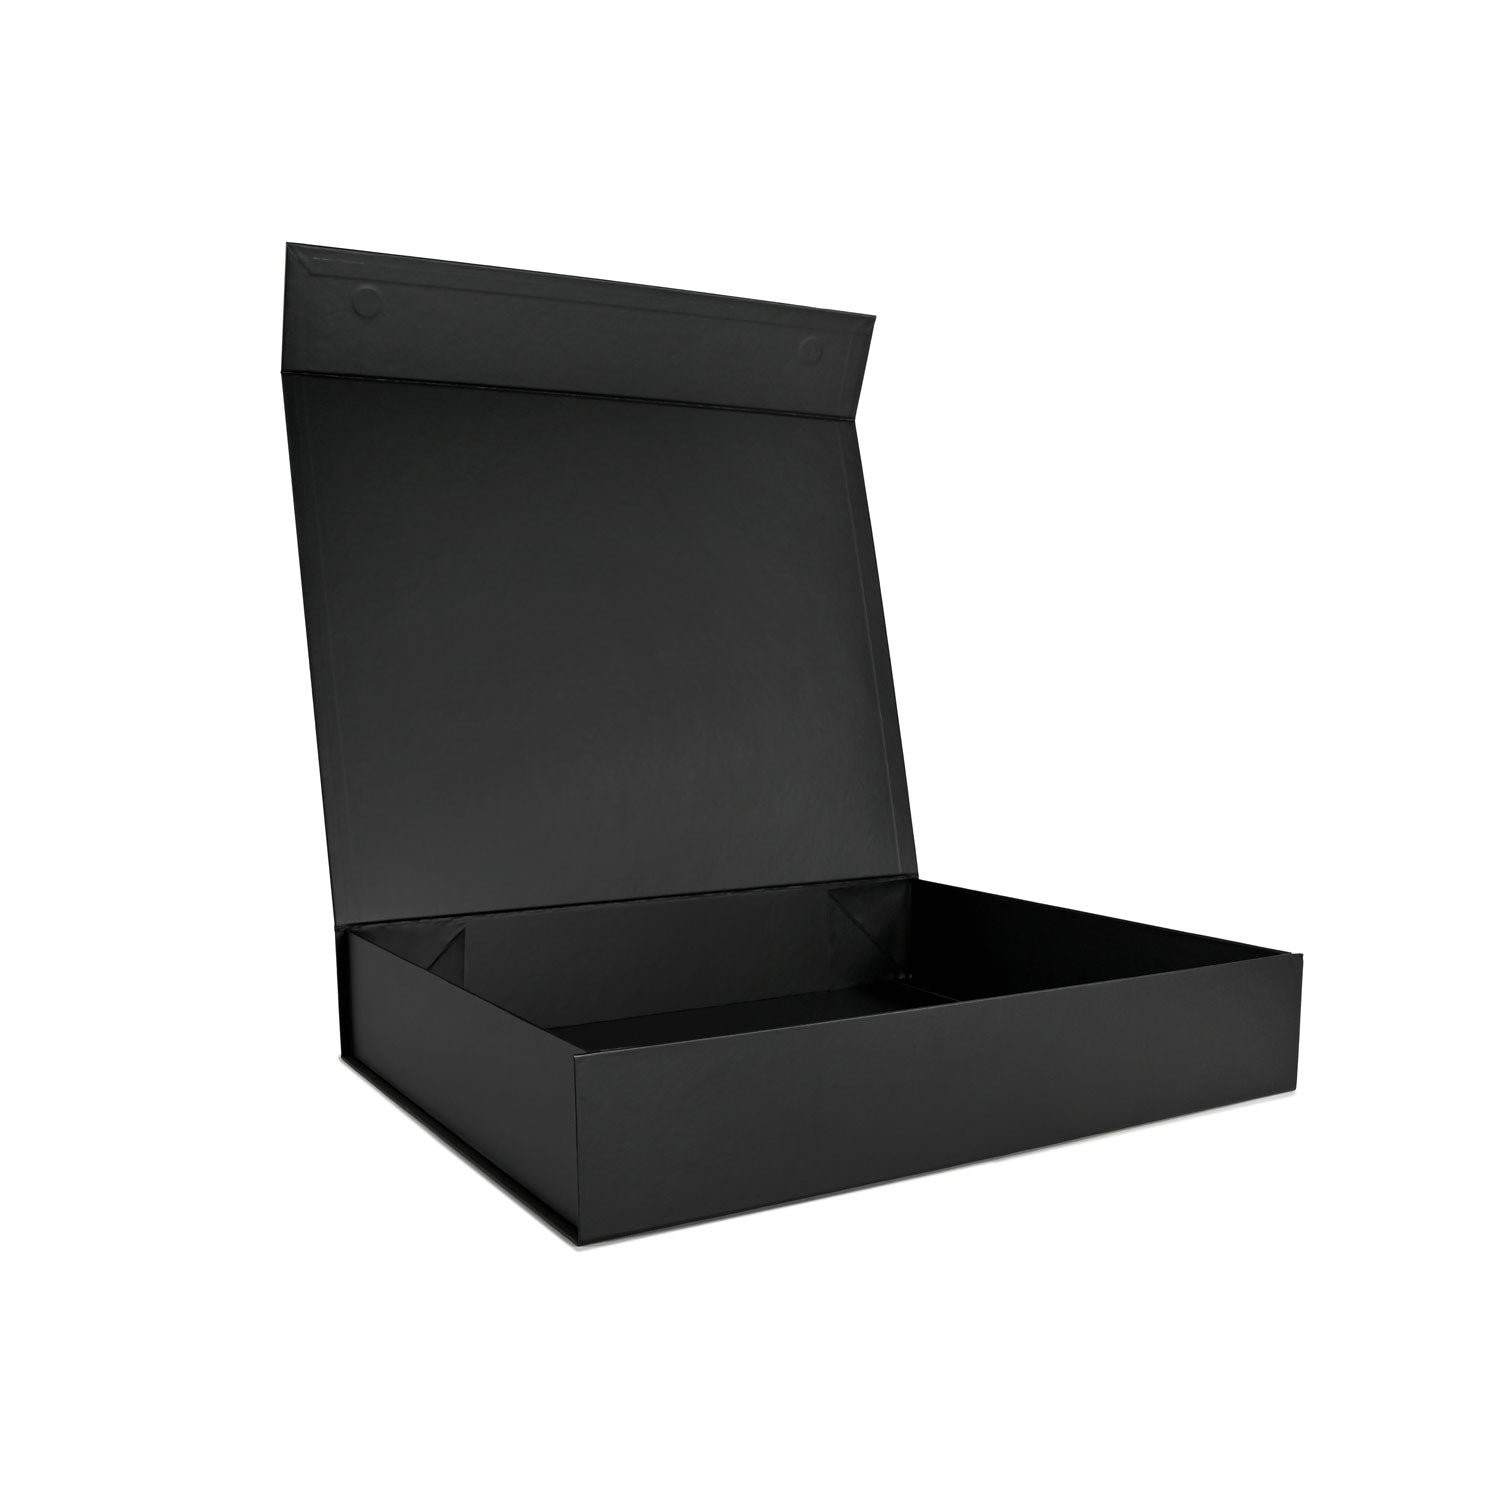 Extra large sleek magnetic balck gift box, perfect for special occasions | NEON Packaging